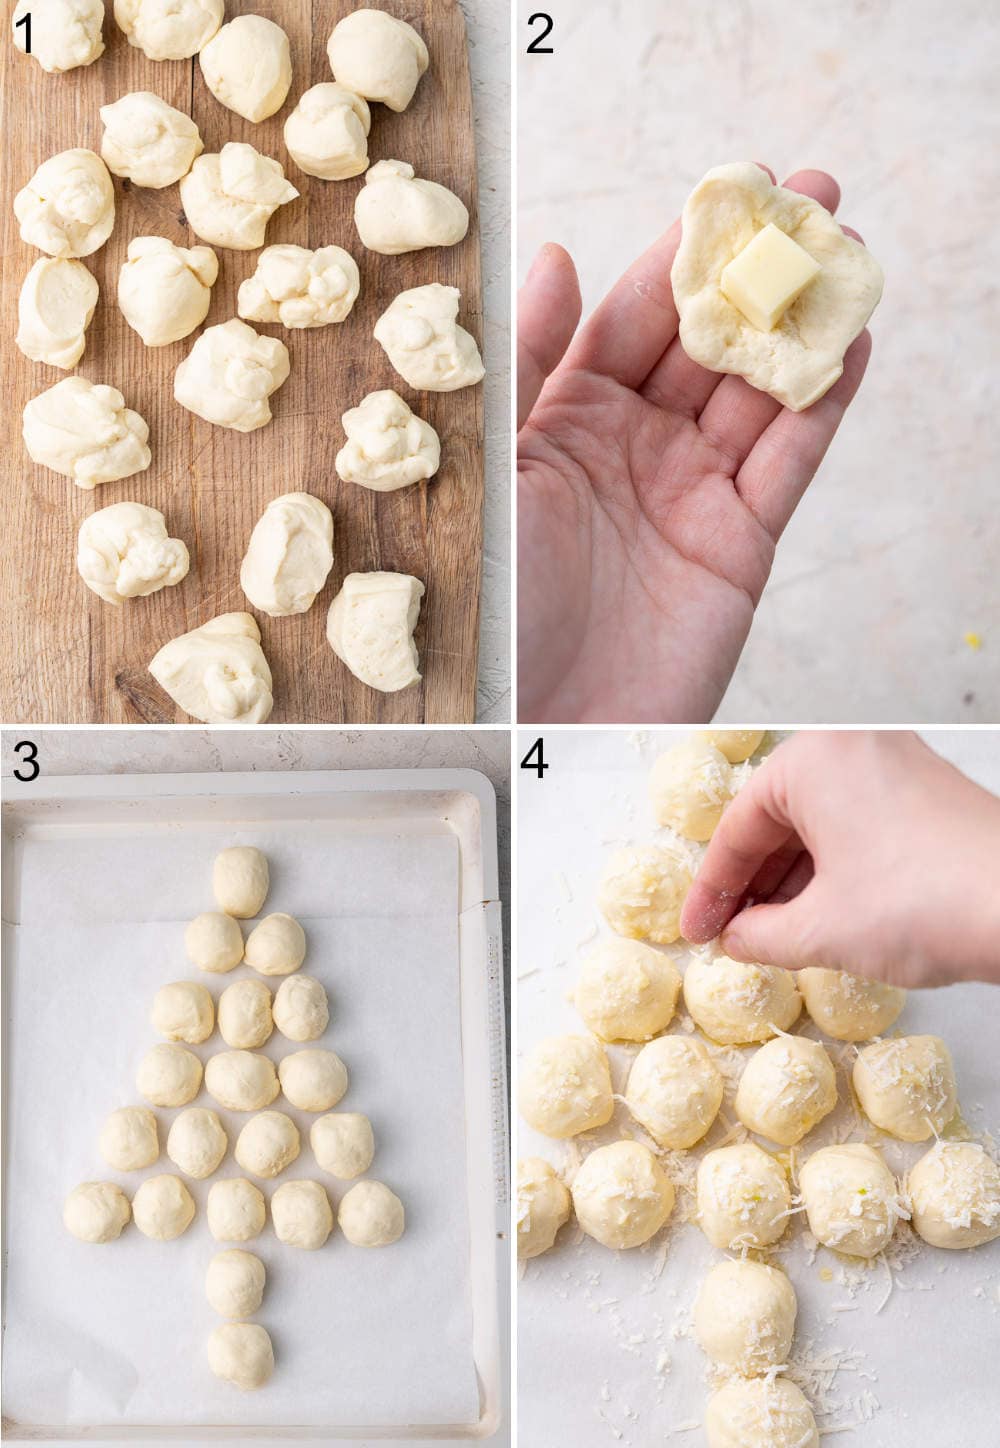 A collage of 4 photos showing how to prepare pull-apart Christmas tree step-by-step.